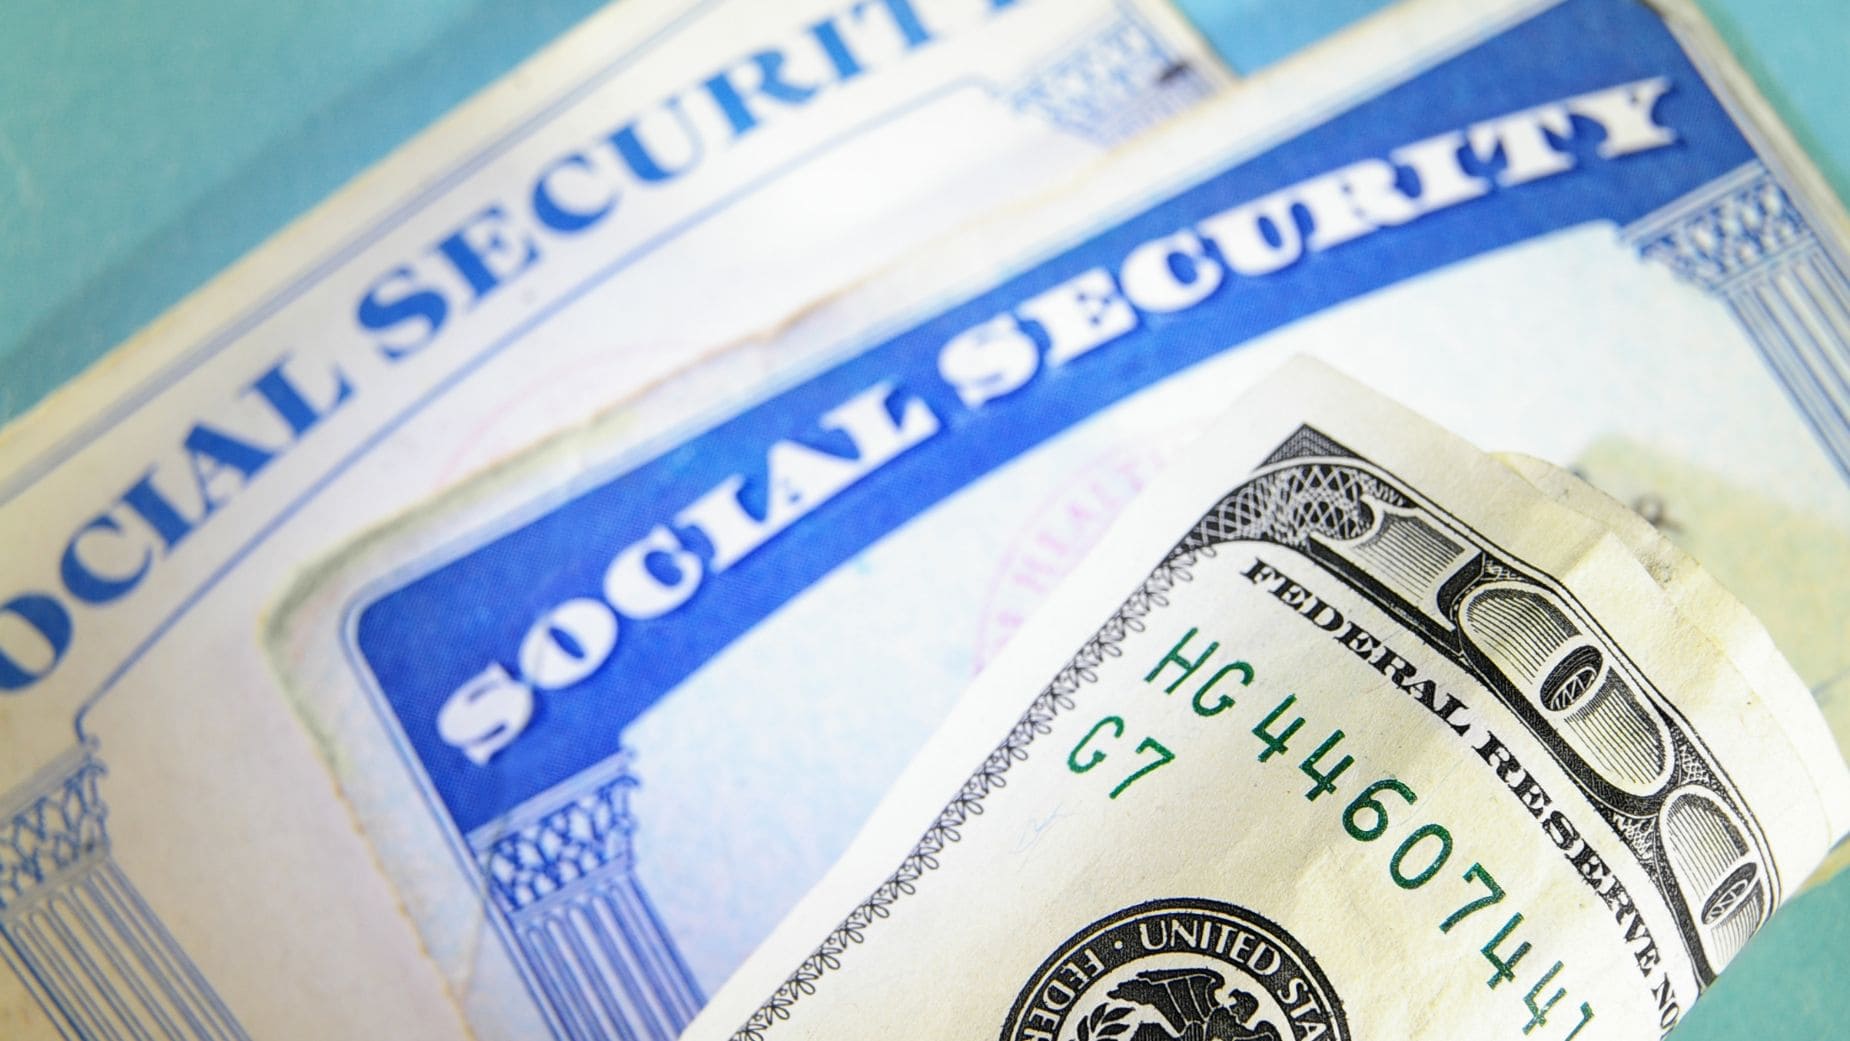 Find out if you are getting a new Social Security check in this week